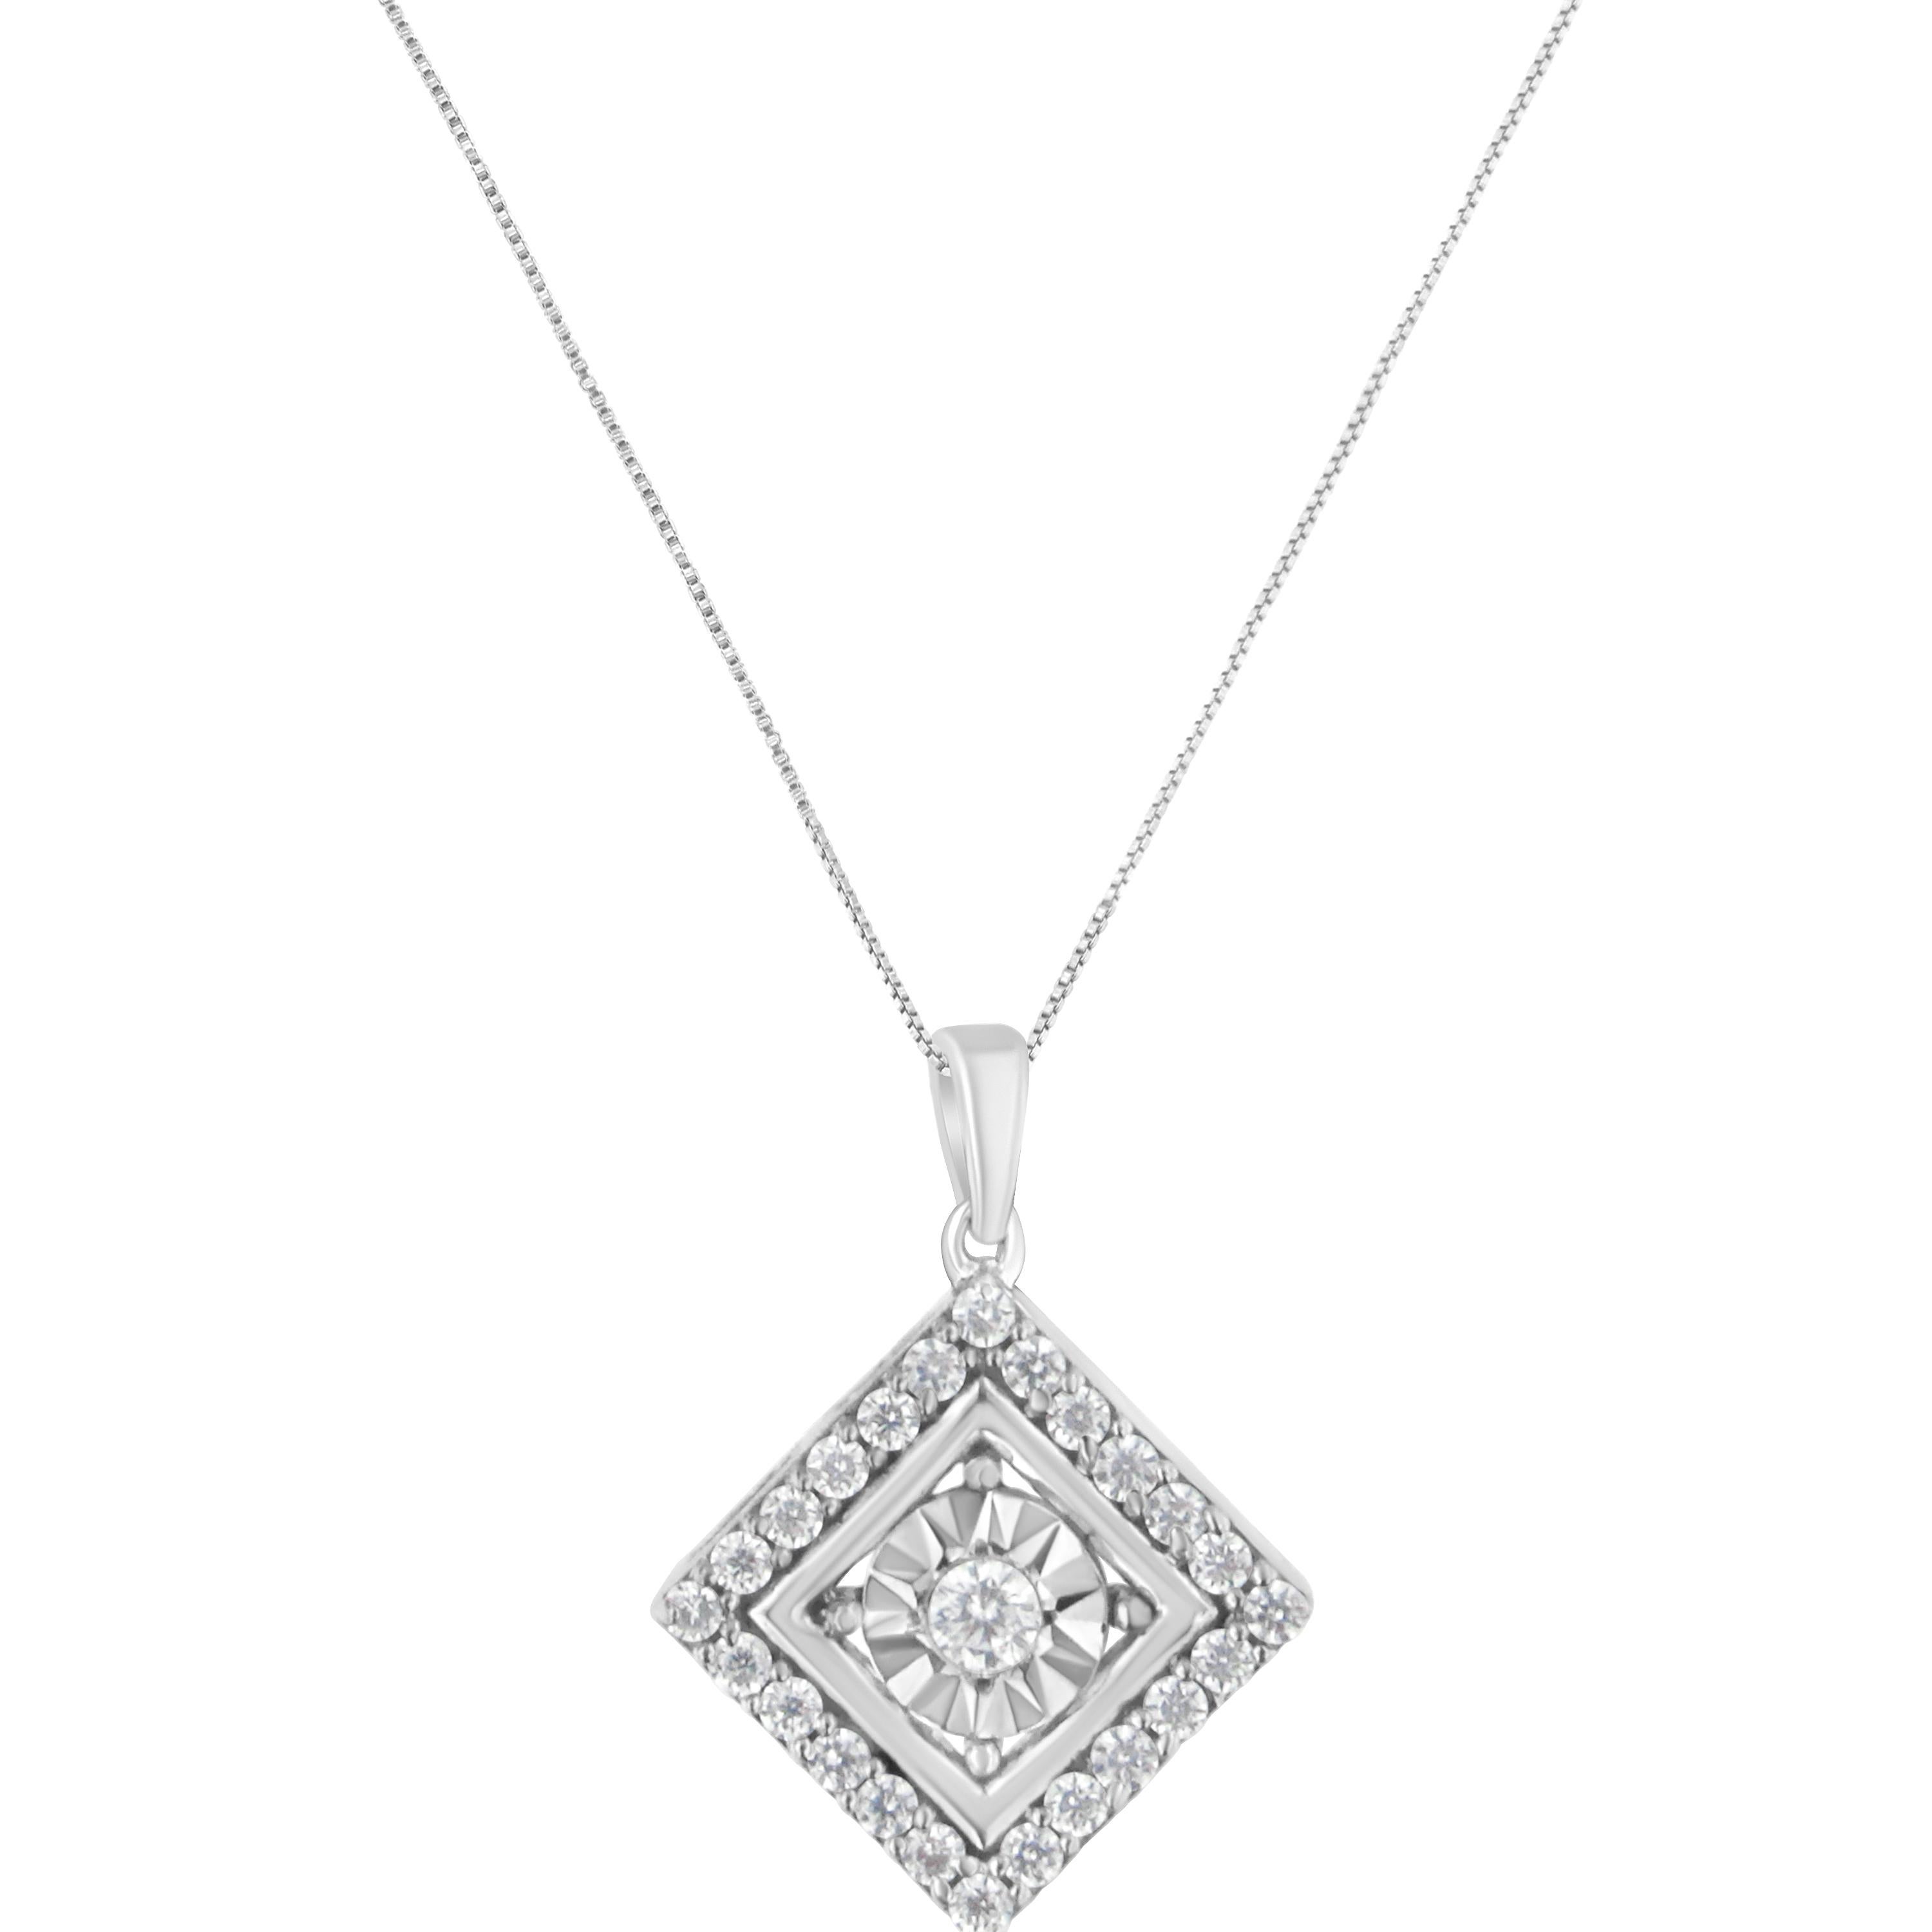 Elegant and unique, this 10k white gold square-shaped pendant will sparkle on your neck. This beautiful necklace features a single, beautiful miracle set, round-cut diamond at the center of the design. The diamond is framed by a layer of white gold,